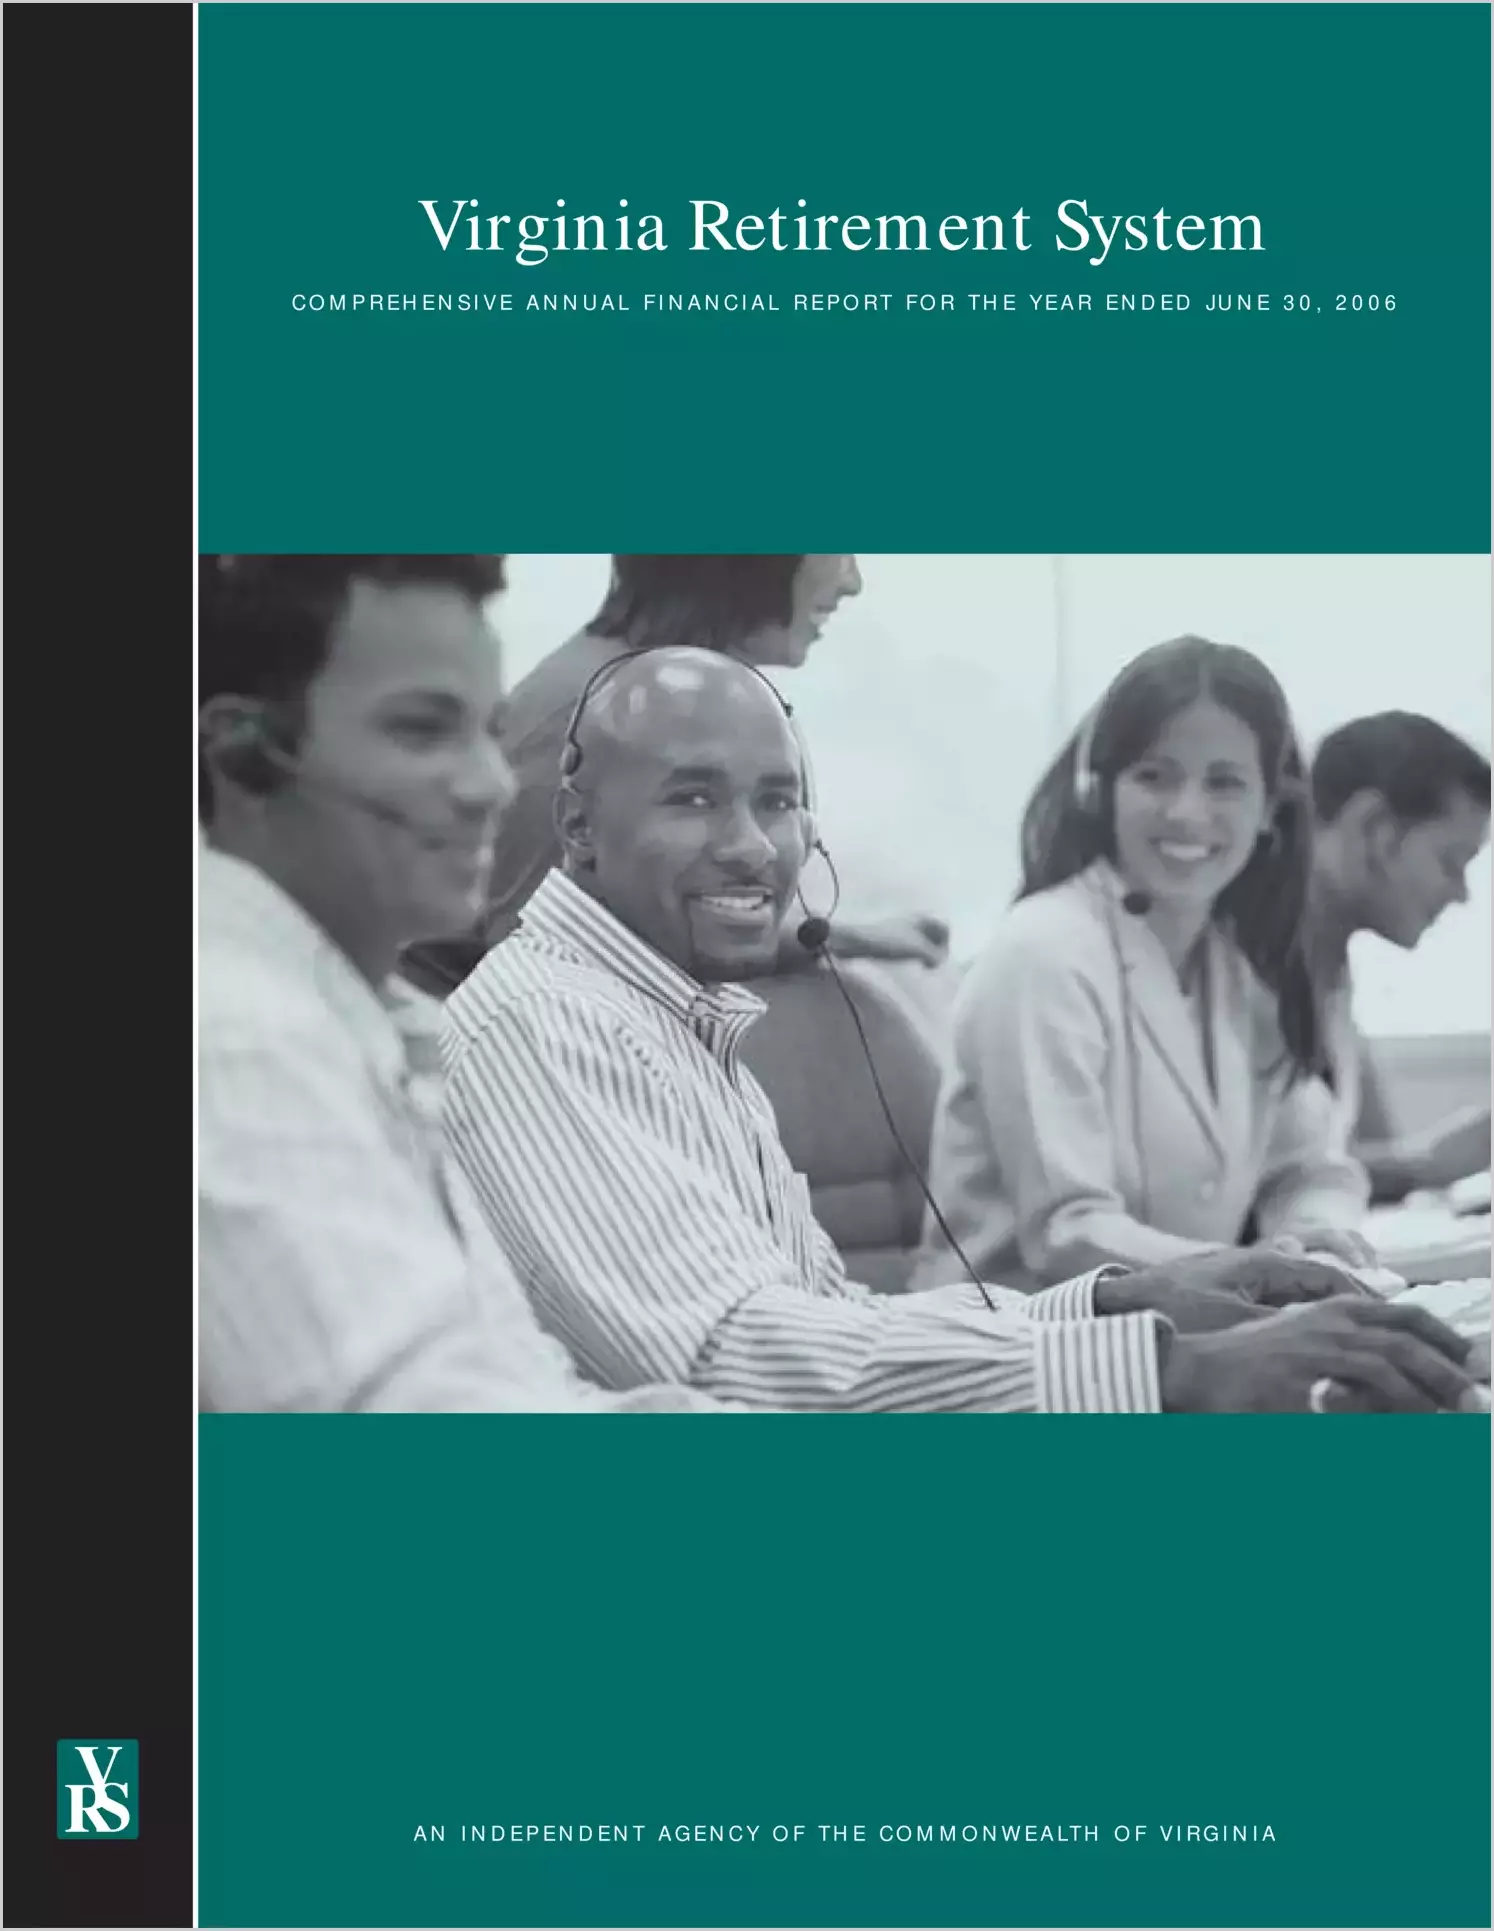 Virginia Retirement System Annual Report for the year ended June 30, 2006